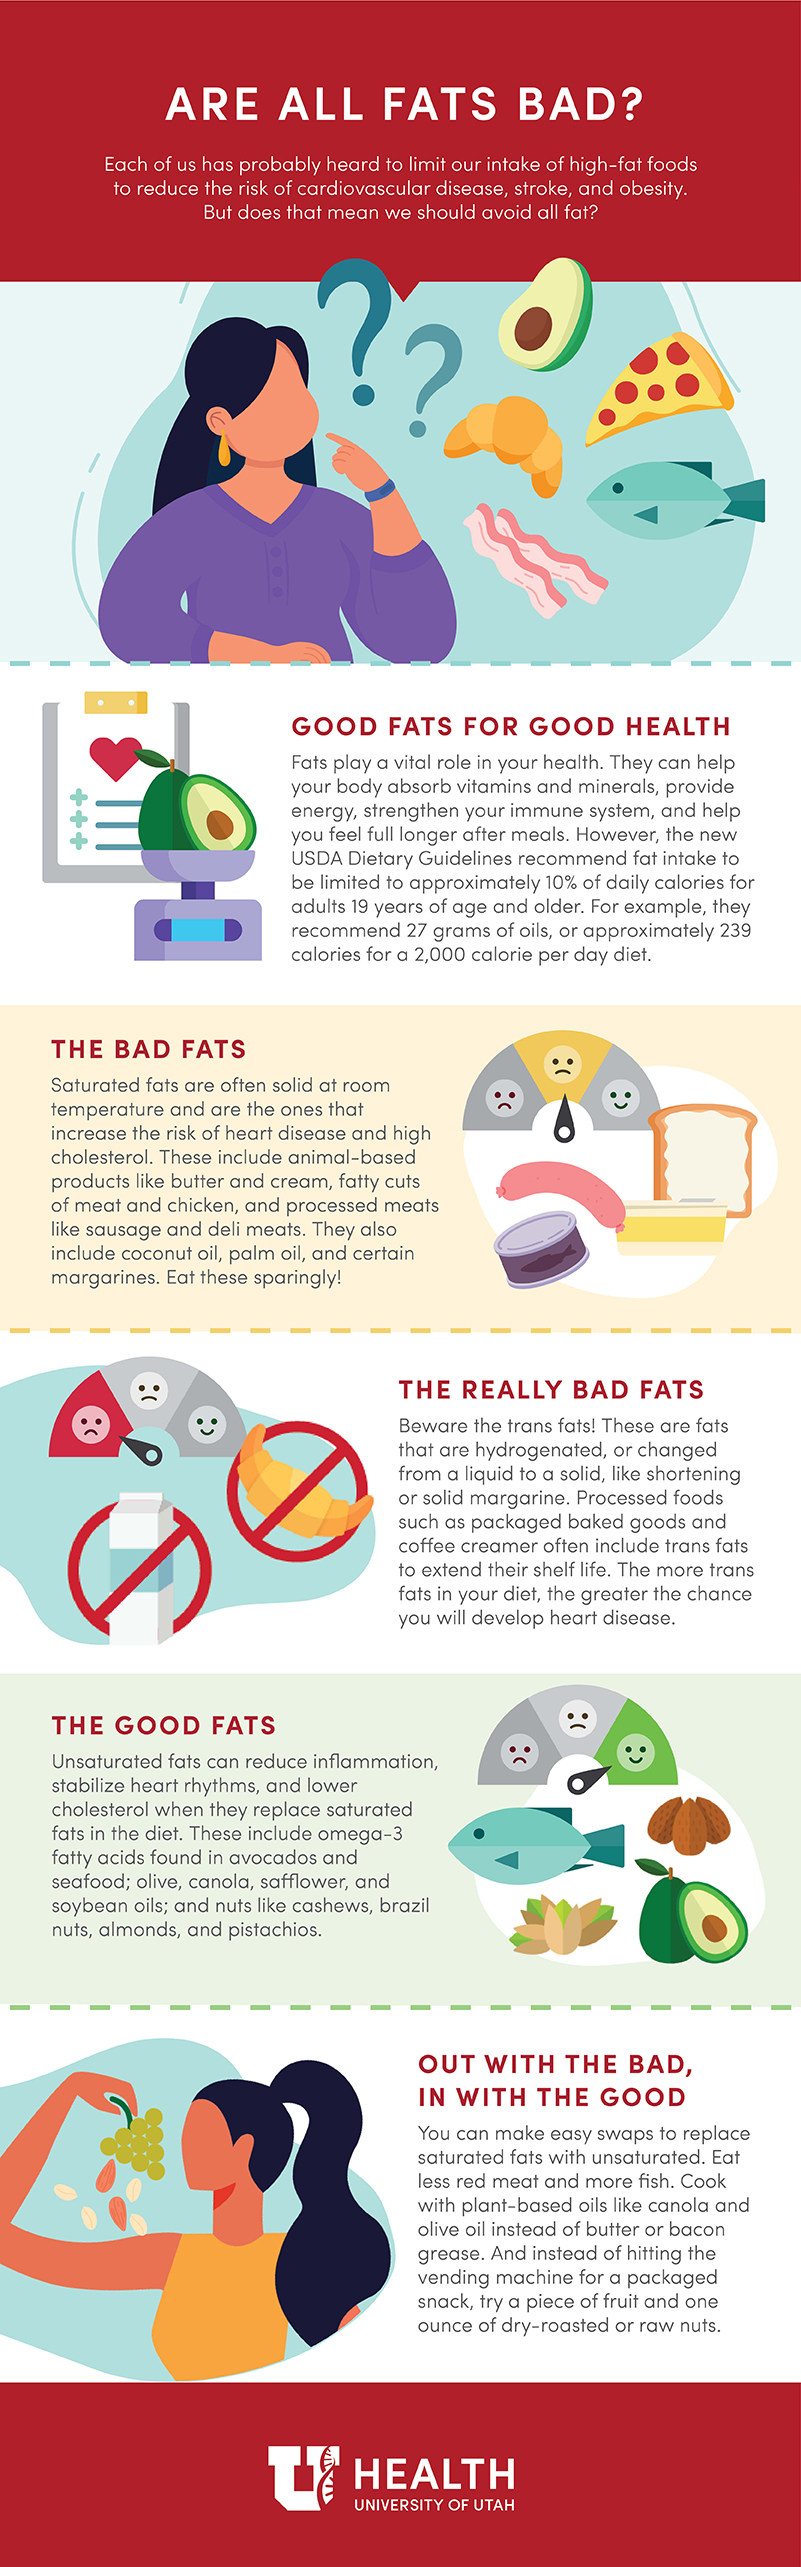 Are all fats bad?